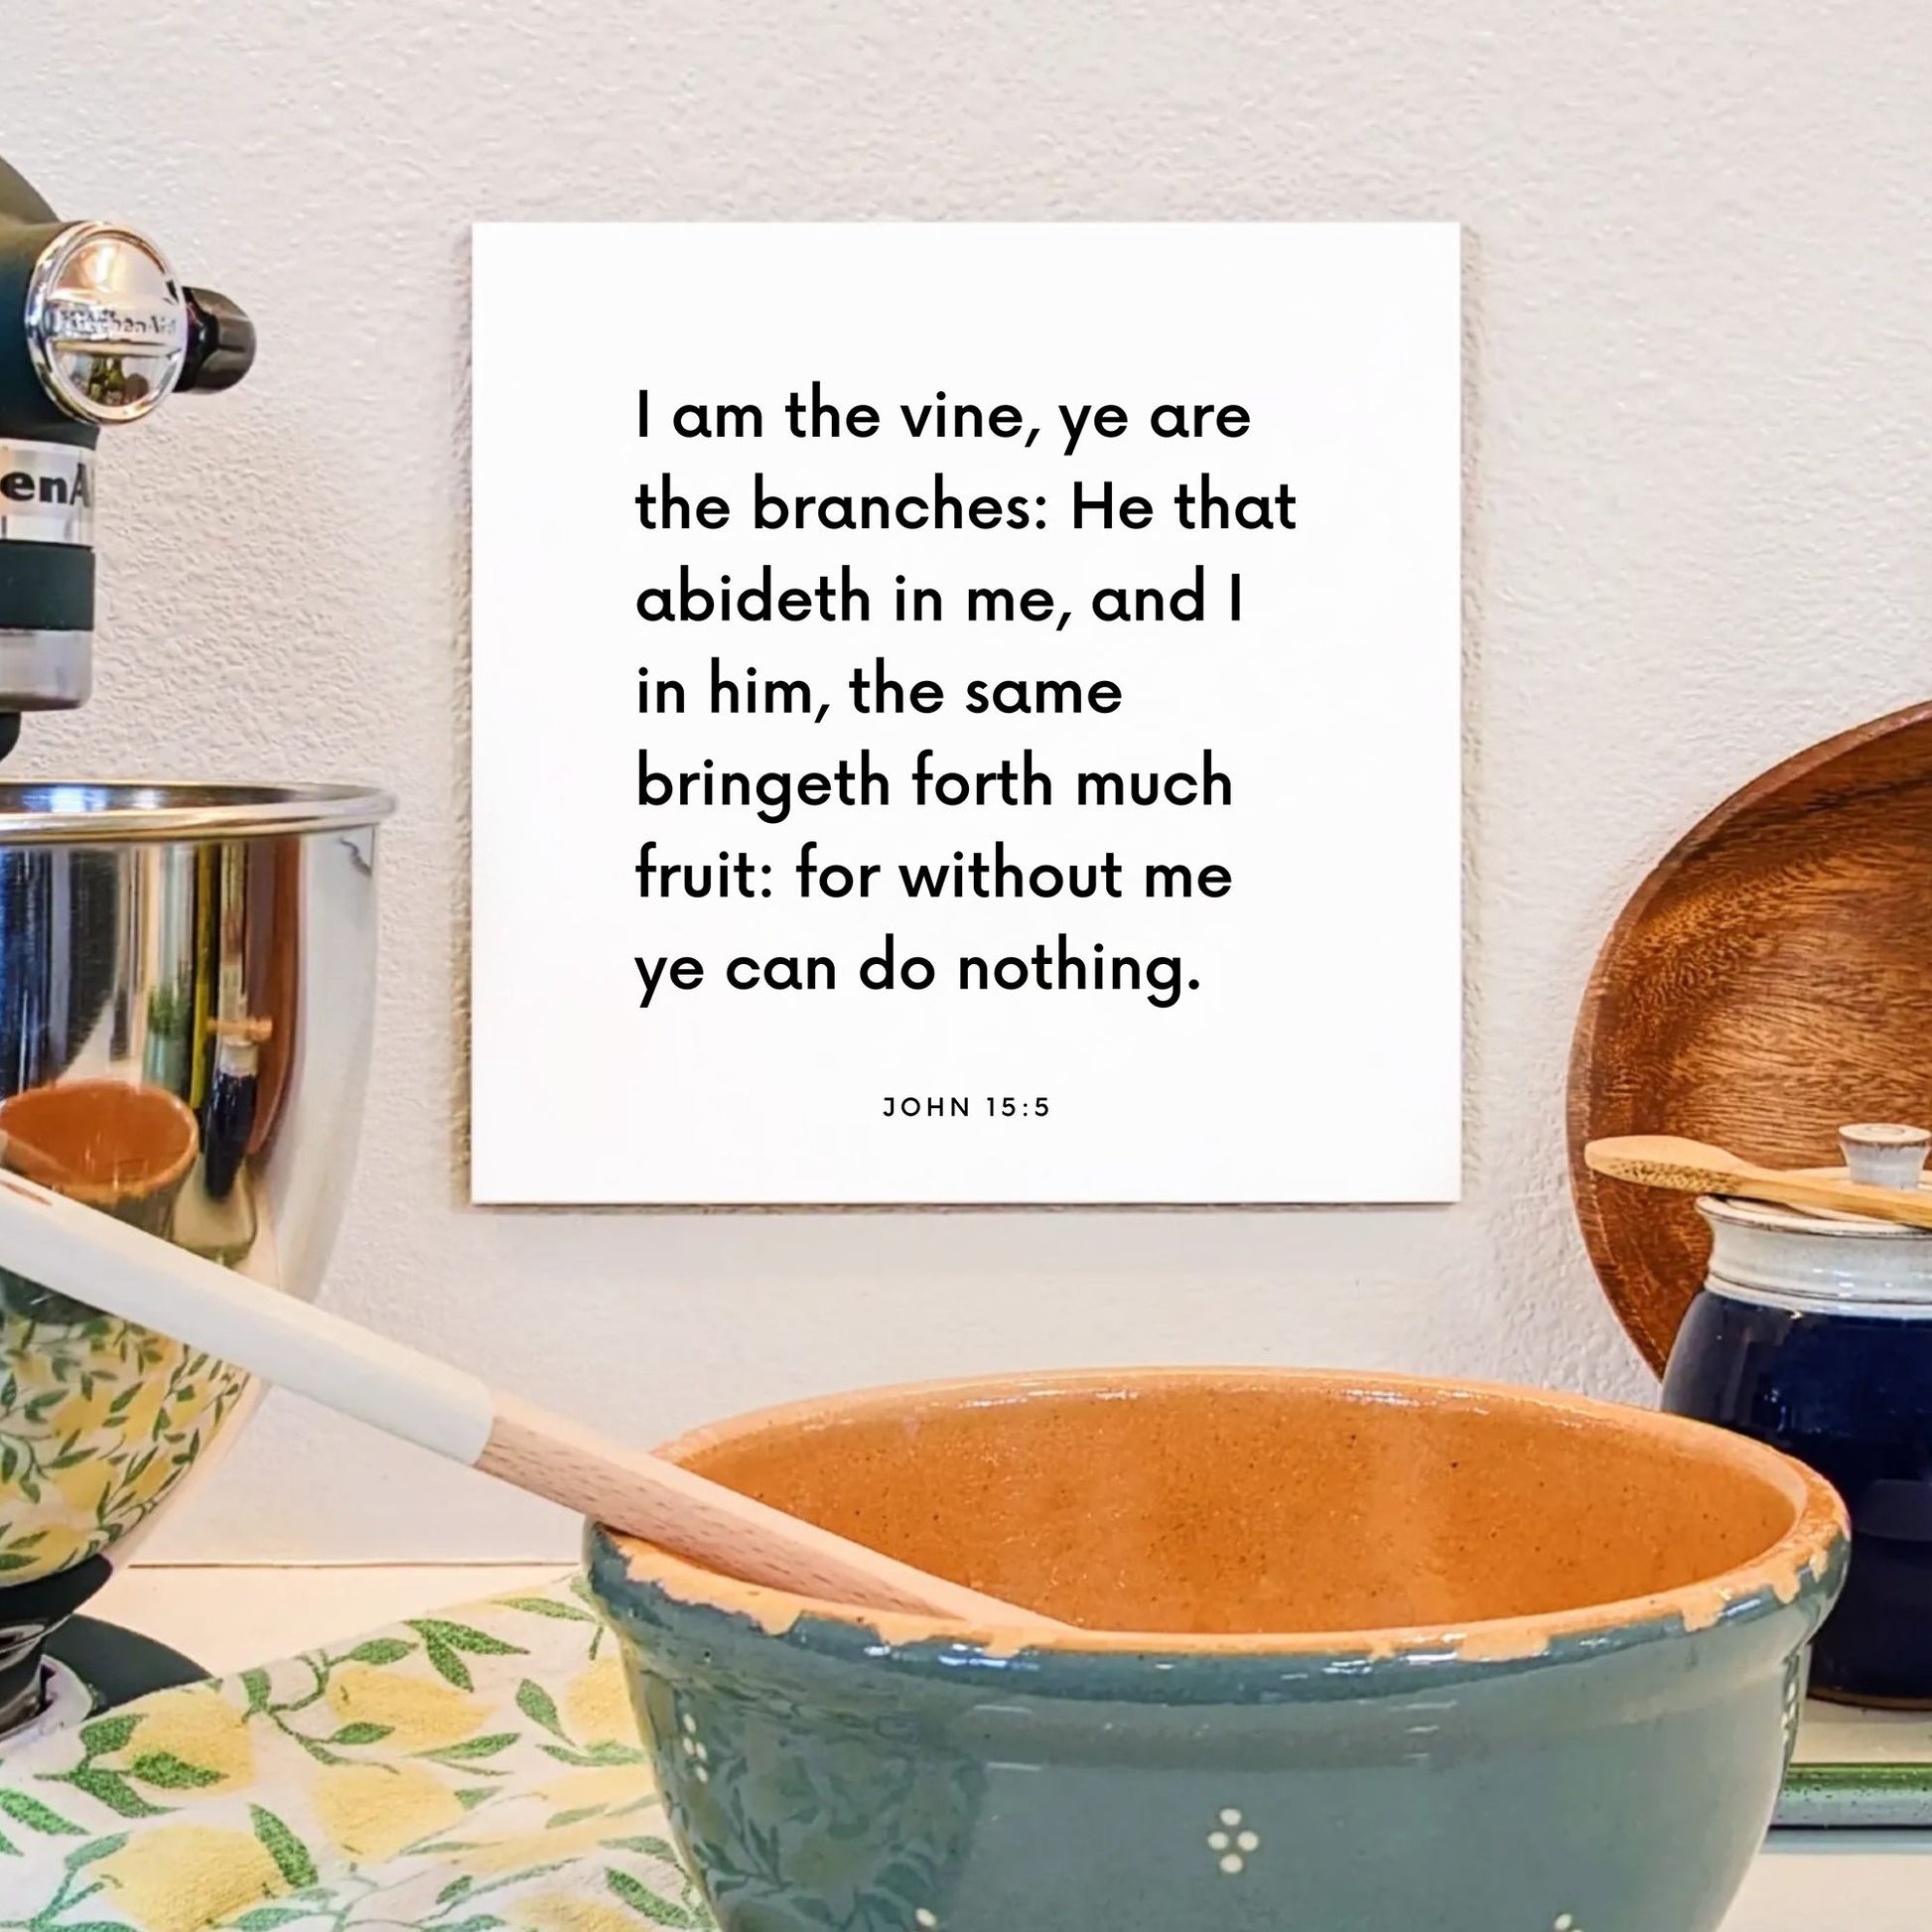 Kitchen mouting of the scripture tile for John 15:5 - "I am the vine, ye are the branches"